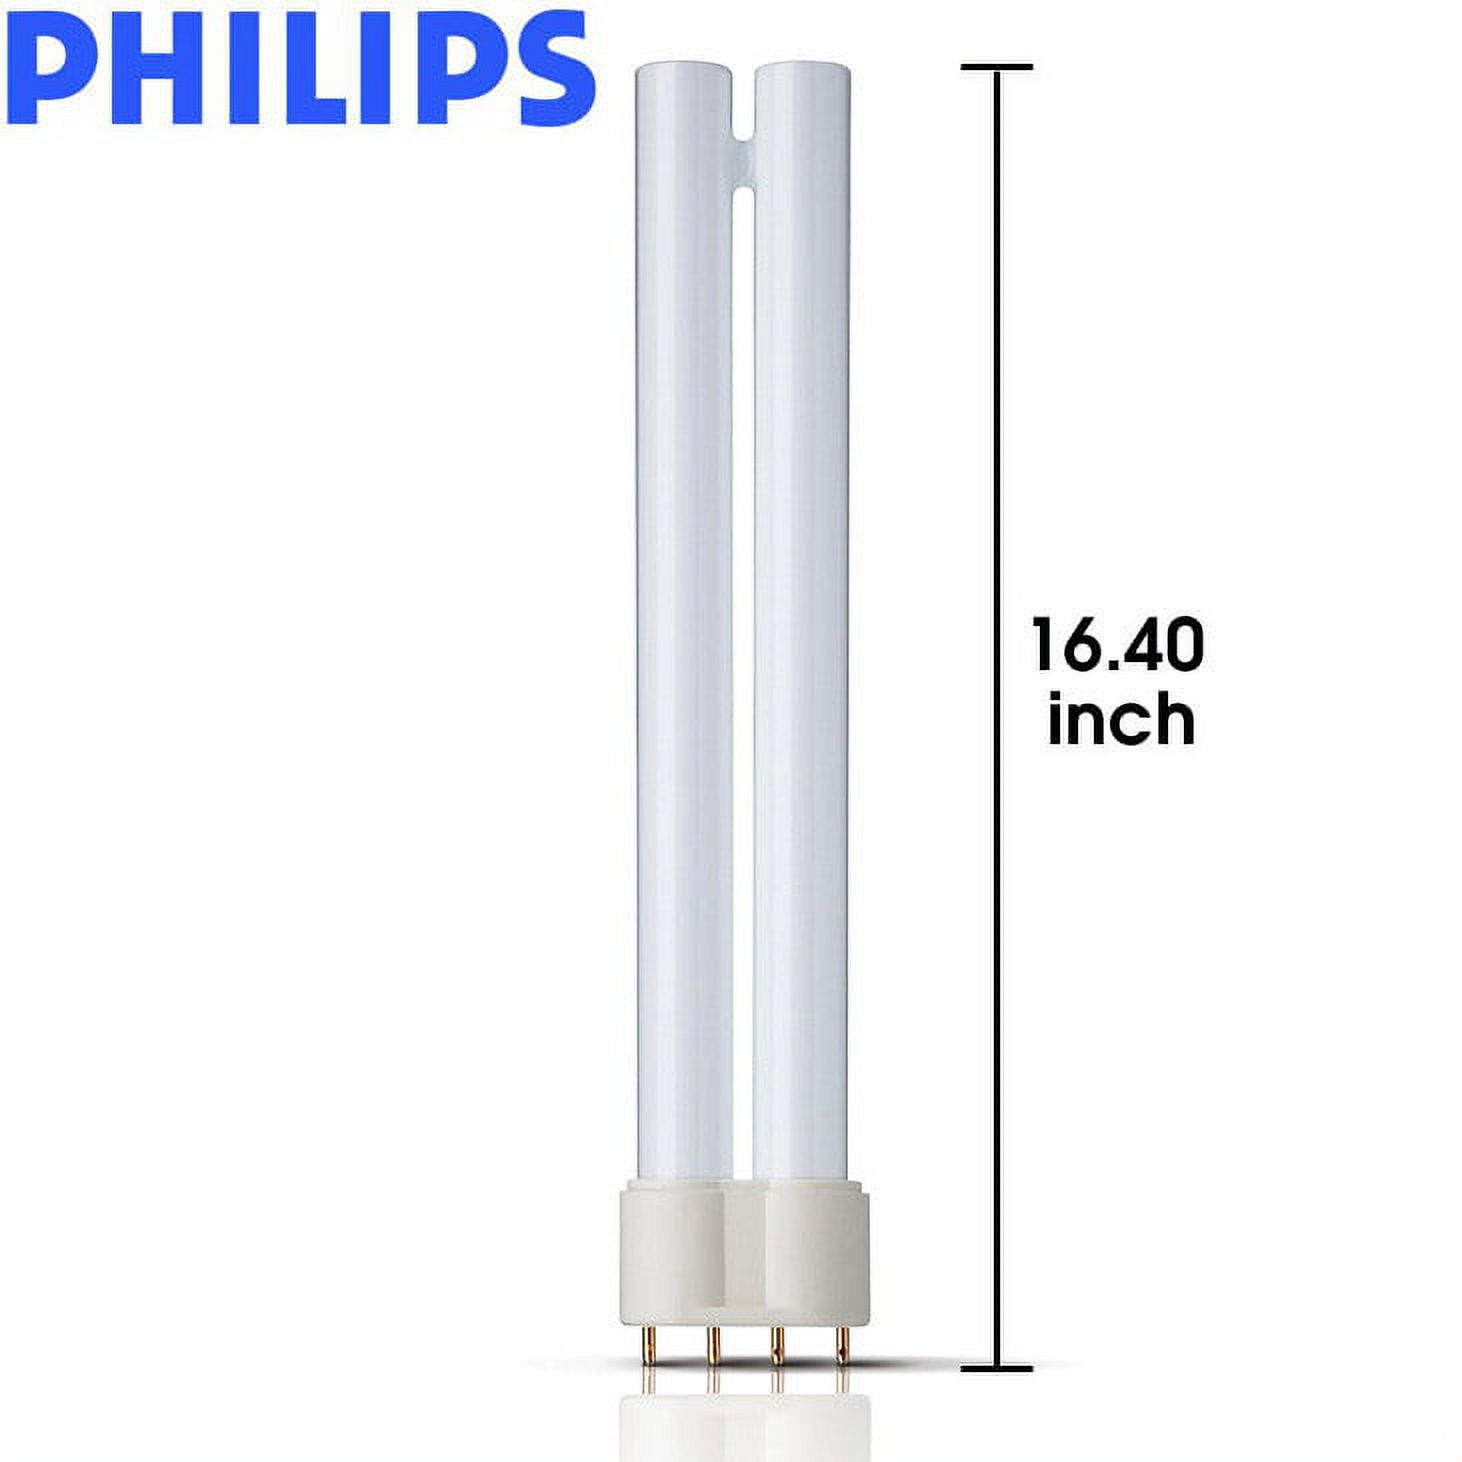 Philips 108266278 Actinic PL-L 36W/10/4P lamp 36w 4-Pin 2G11 base UV Bulb - image 2 of 4